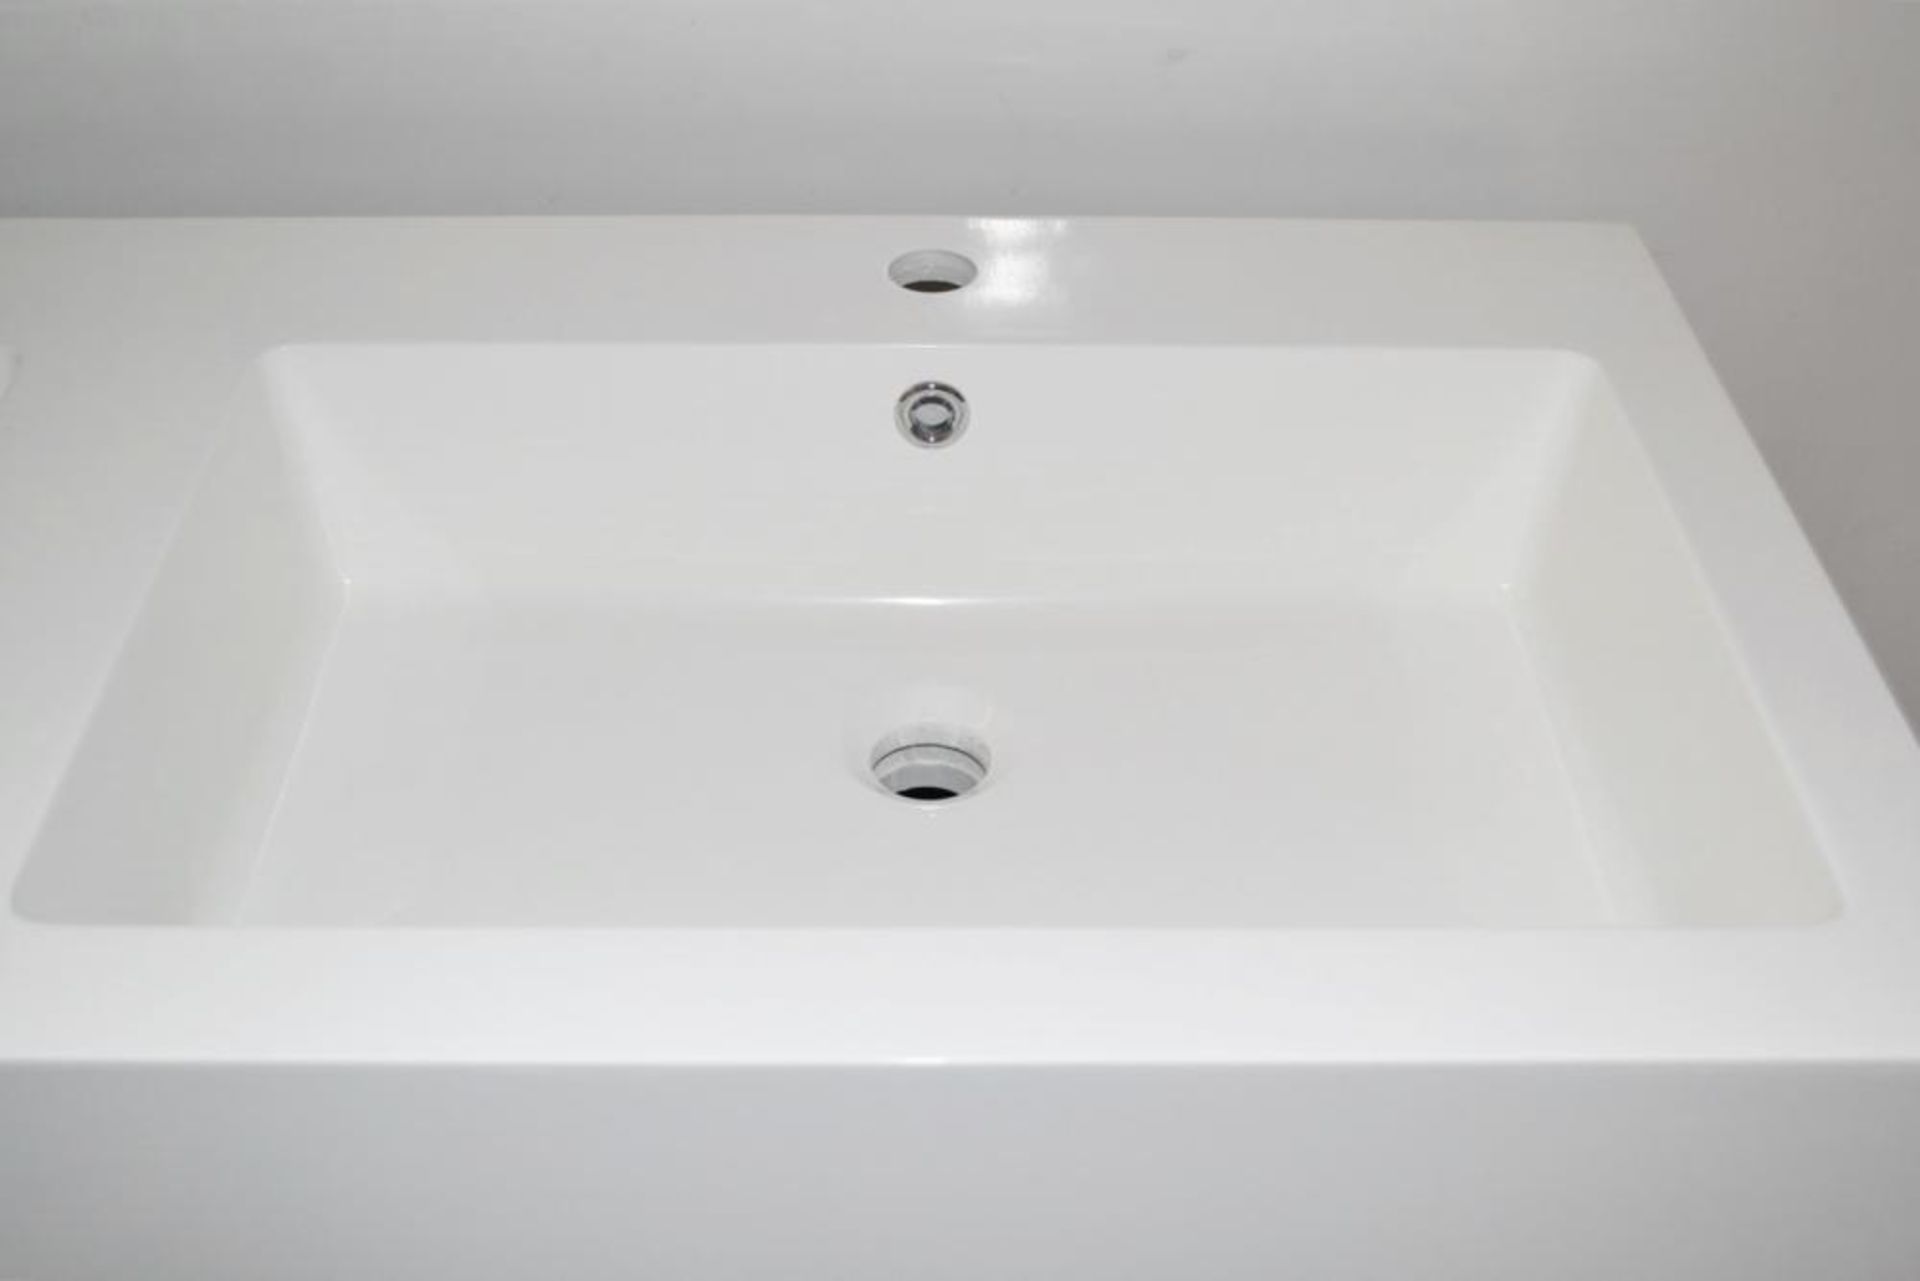 1 x Gloss White 1200mm 4-Door Double Basin Freestanding Bathroom Cabinet - New & Boxed Stock - CL307 - Image 6 of 7